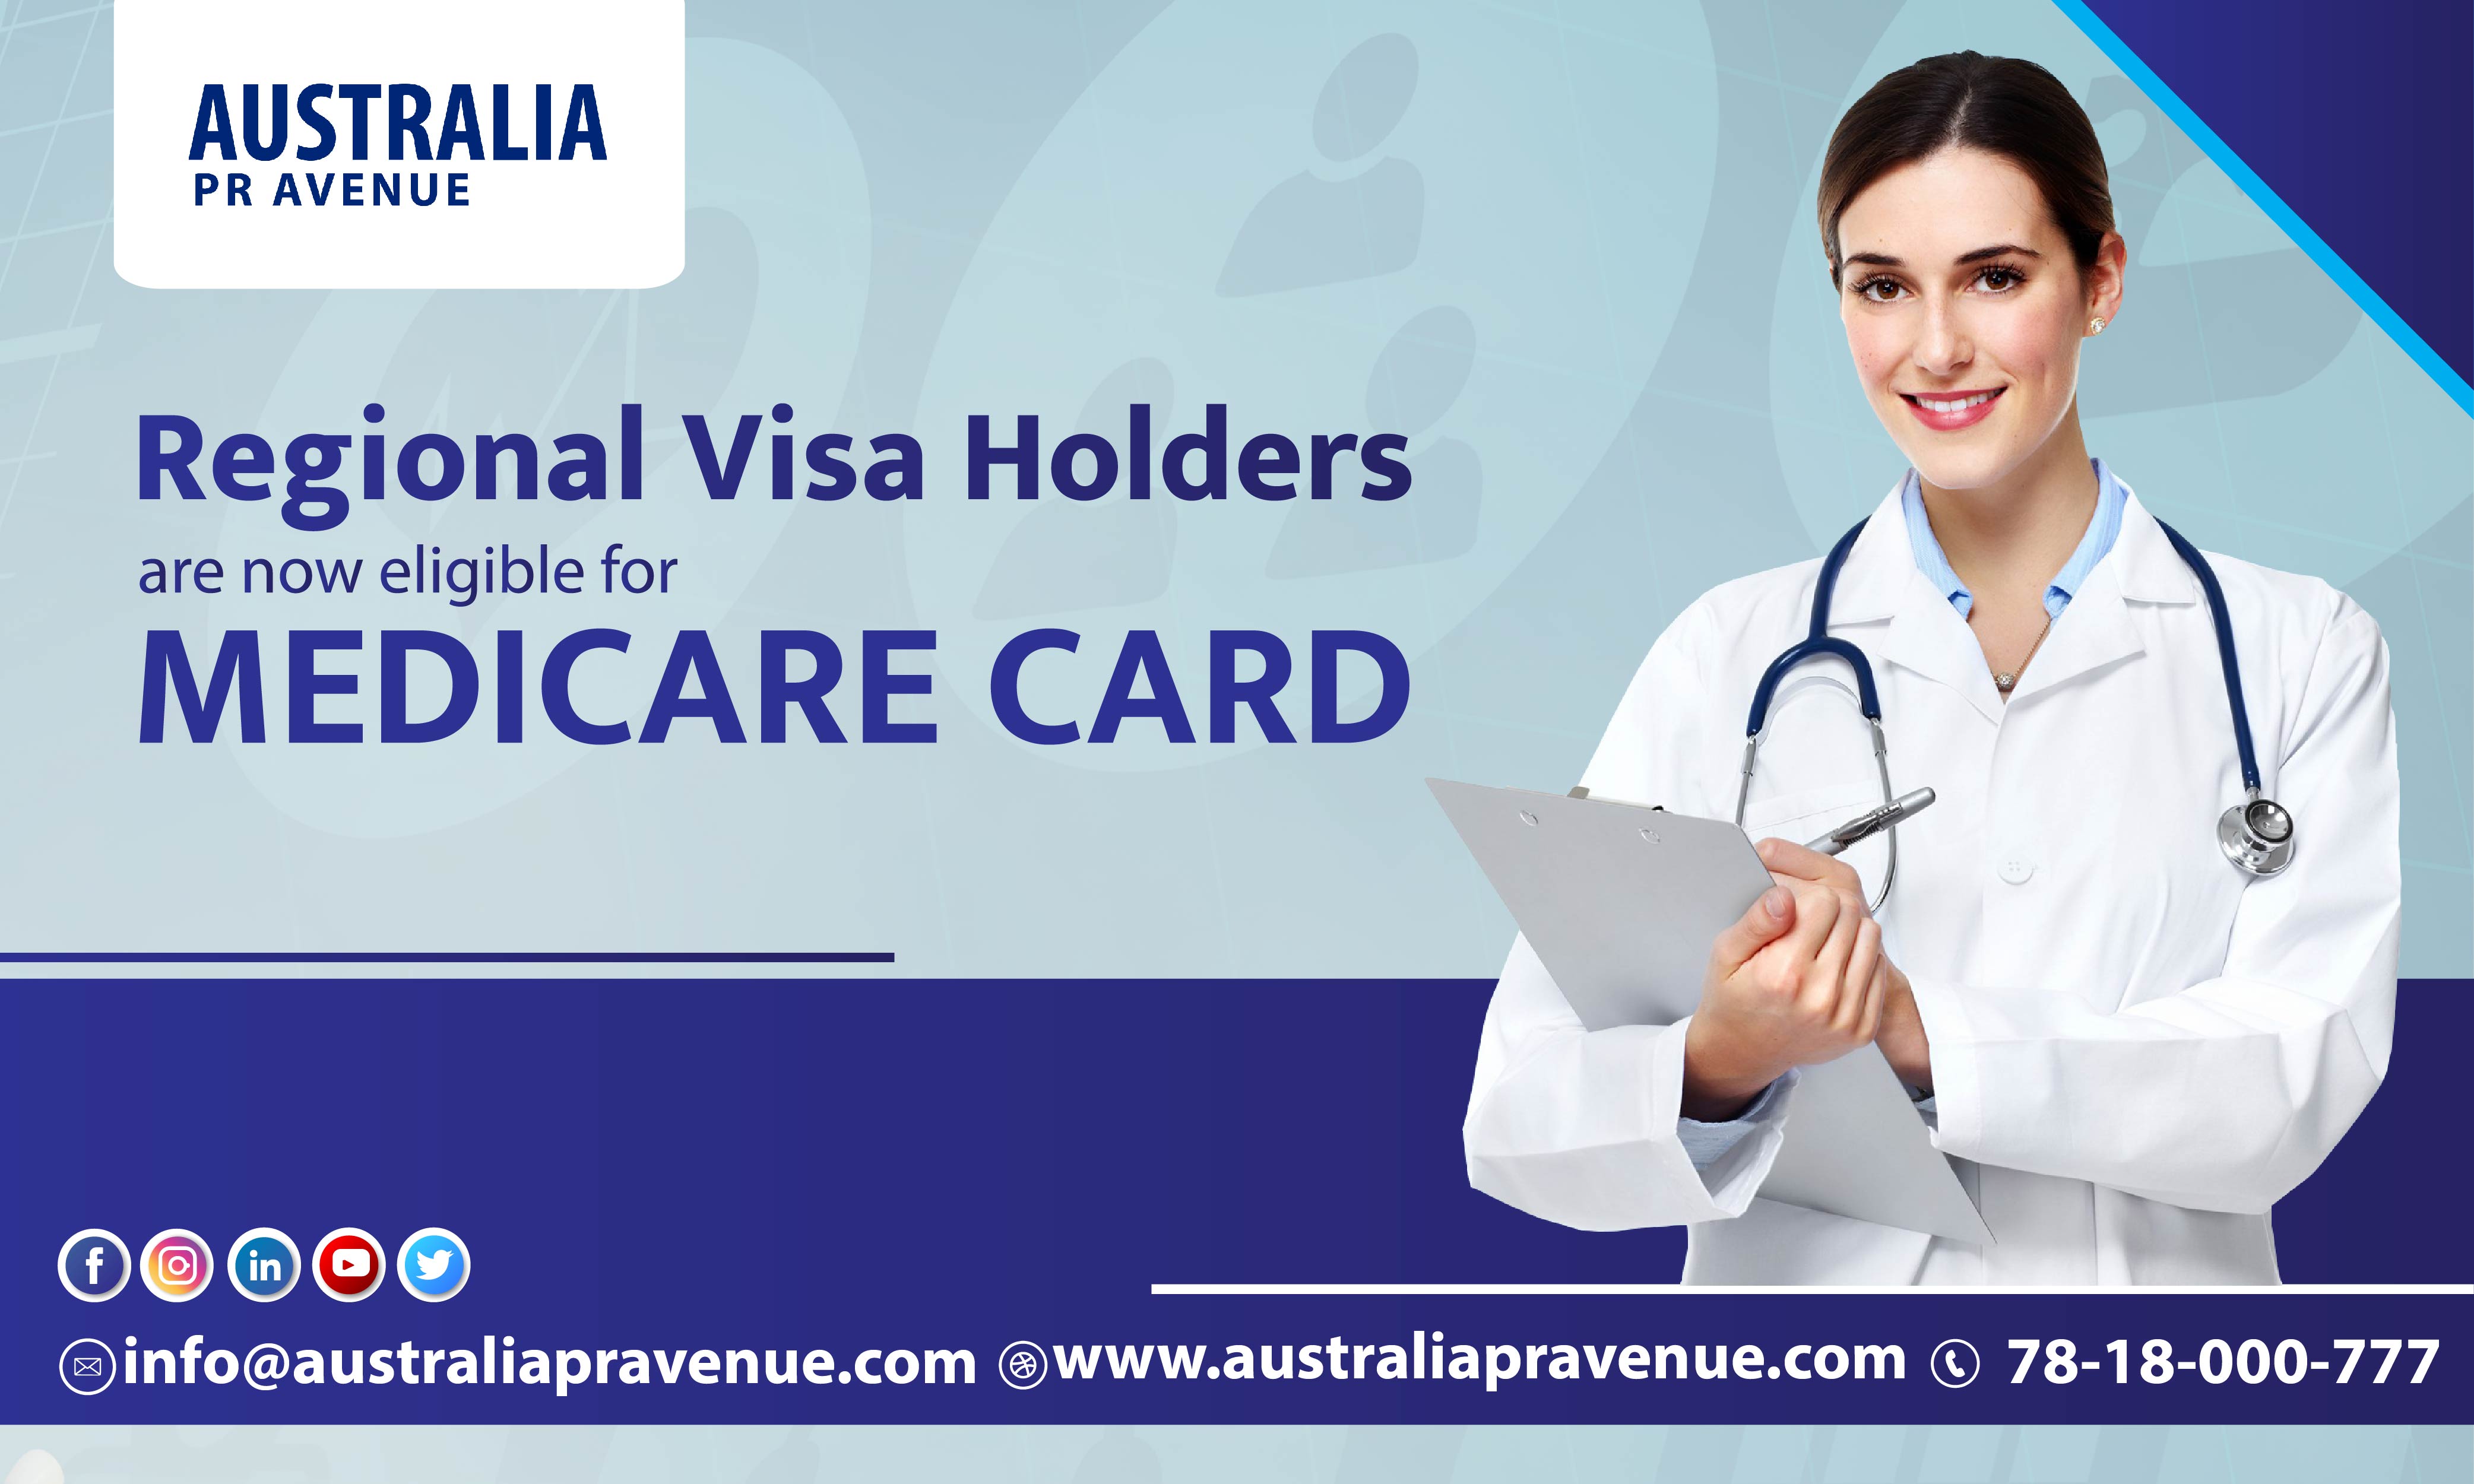 Regional Visa Holders are now eligible for Medicare Card